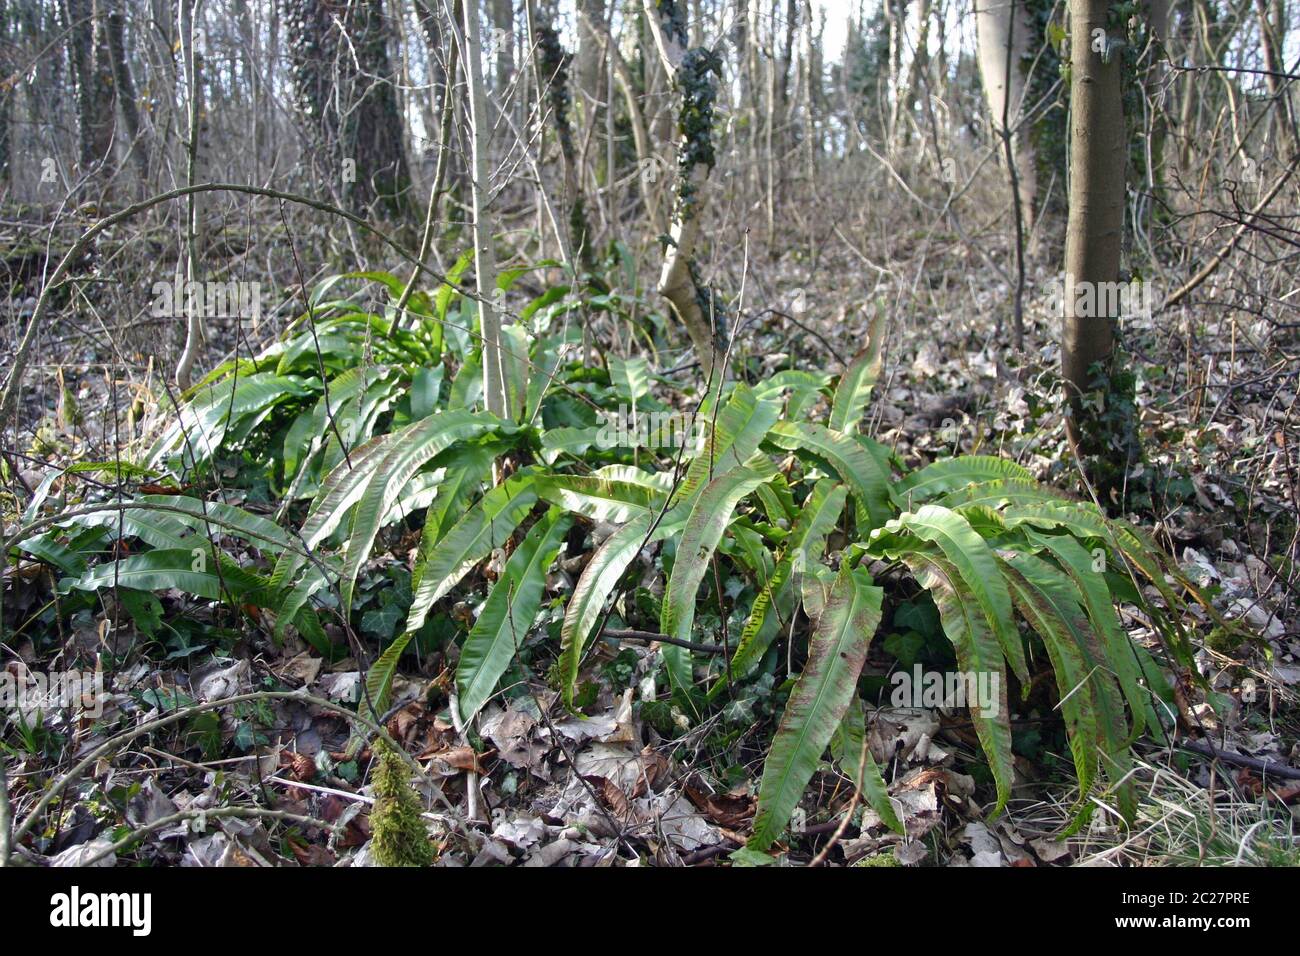 Several clumps of hart's tongue fern (Asplenium scolopendrium) in a winter woodland with focus point to the right. Background of trees and dead leaves Stock Photo